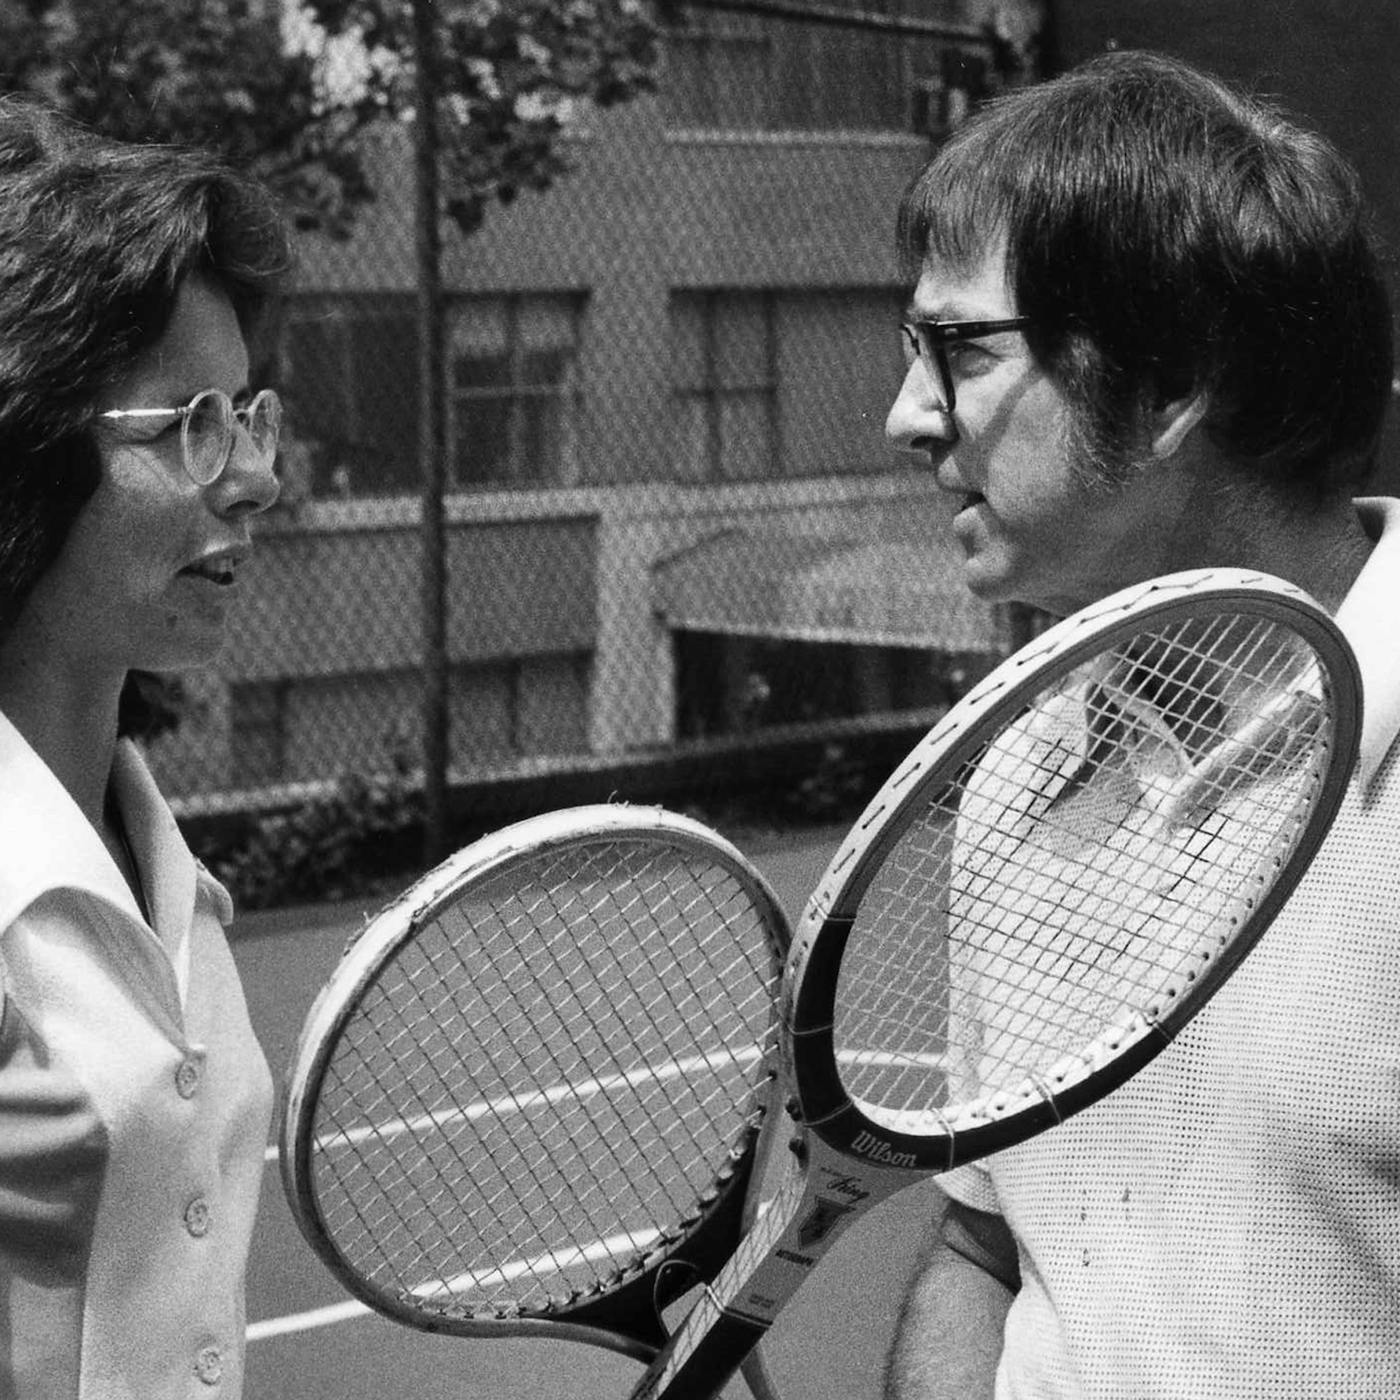 The “Battle of the Sexes” Sparked 50 Years of Sports Progress